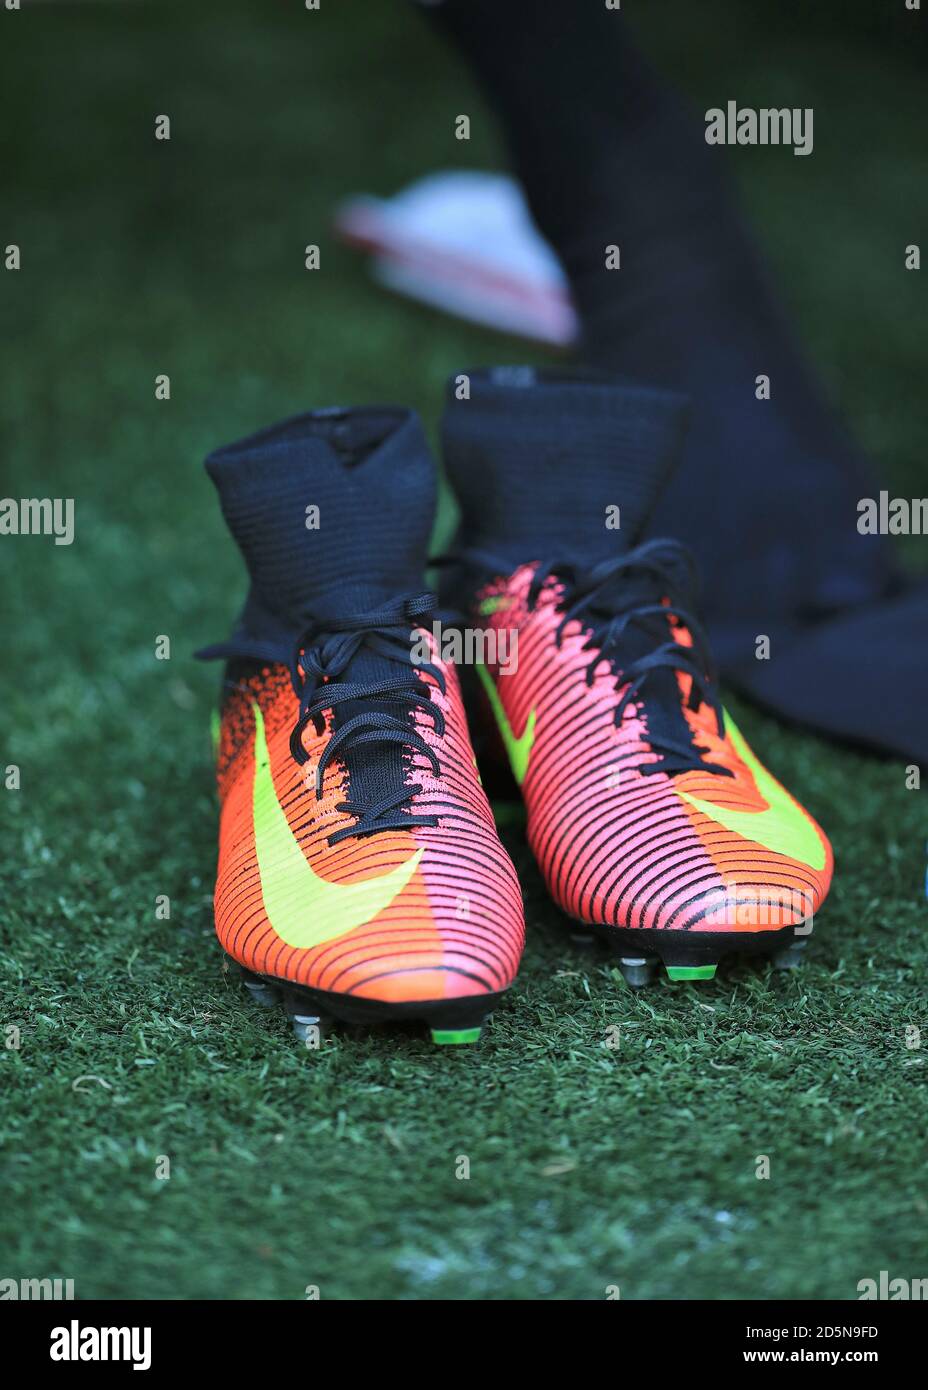 pair of Nike football boots Photo -